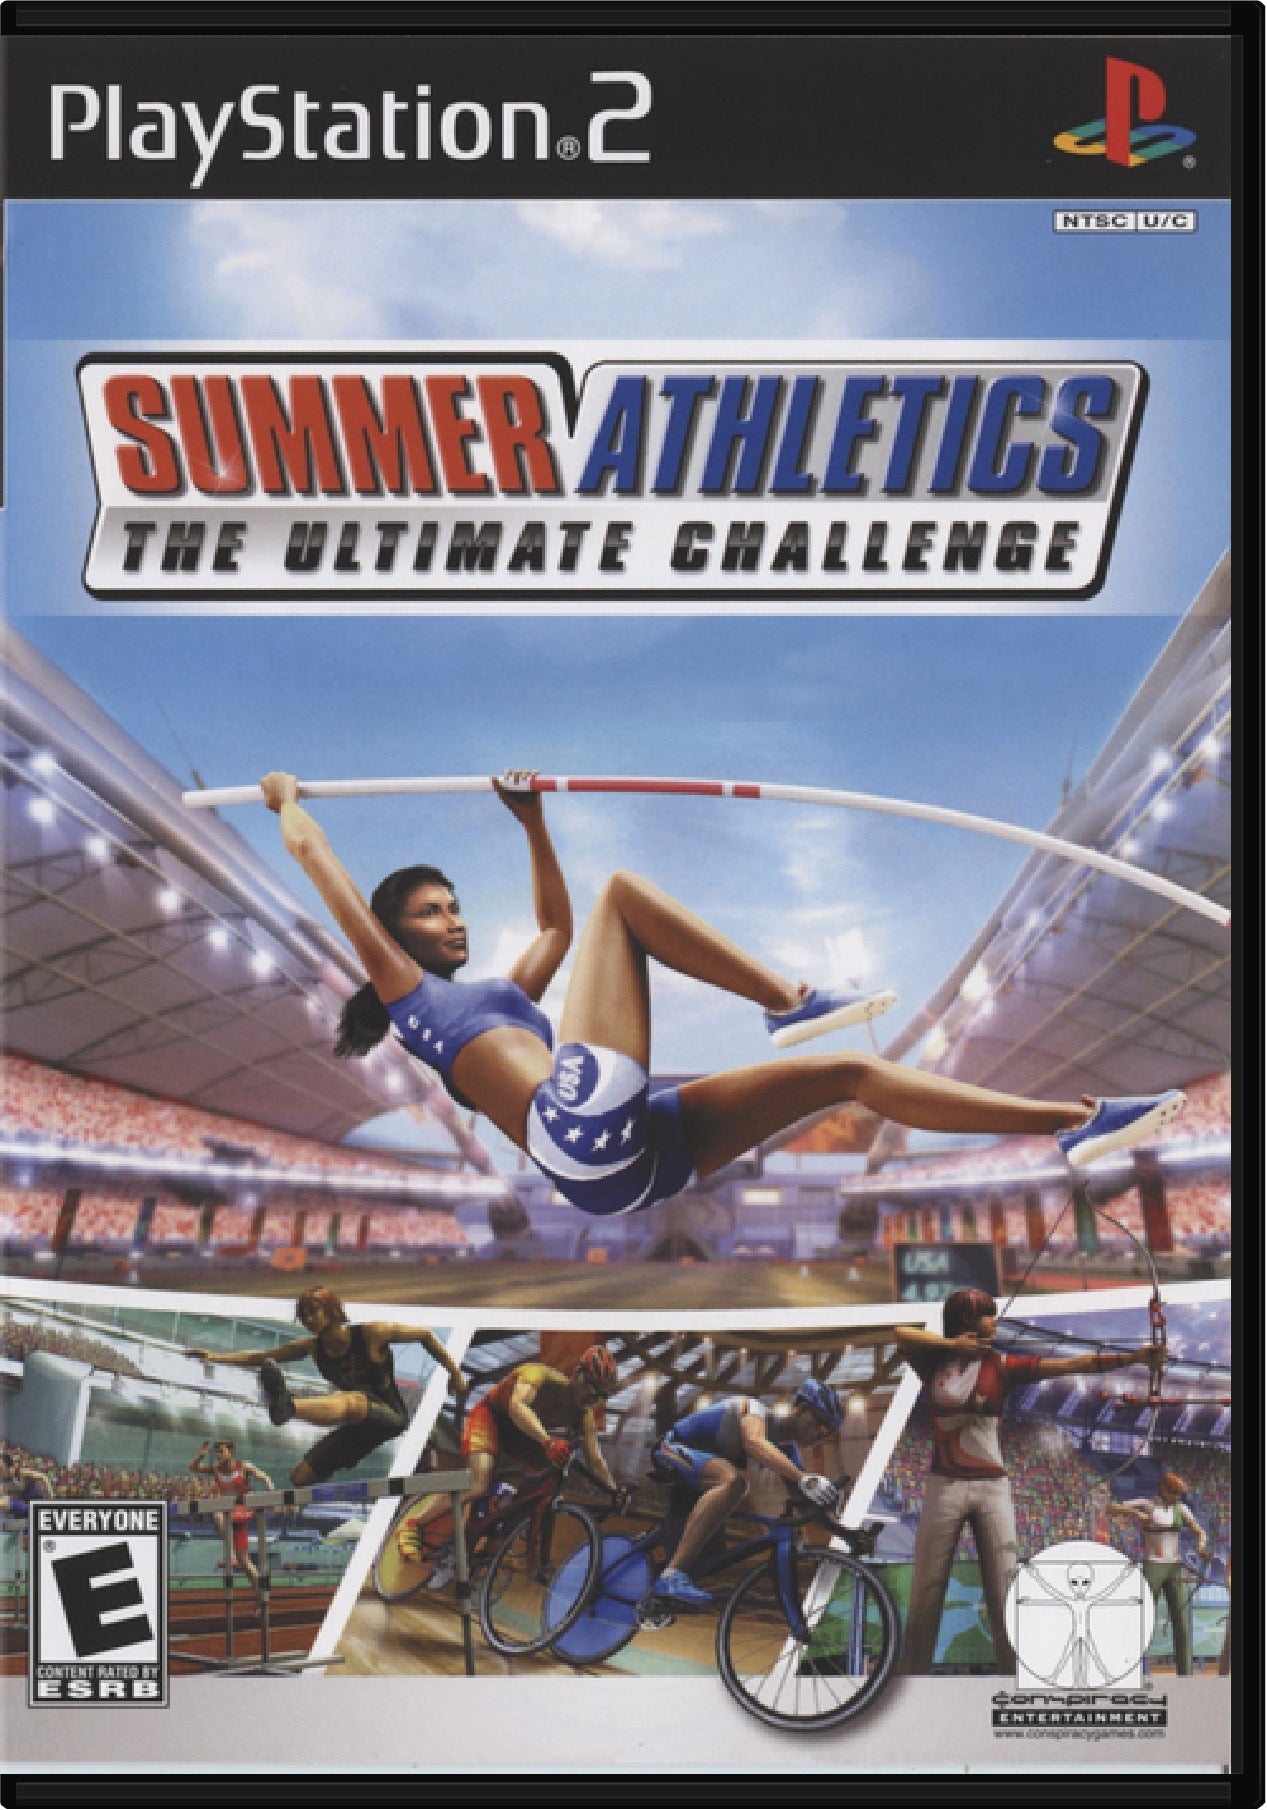 Summer Athletics The Ultimate Challenge Cover Art and Product Photo